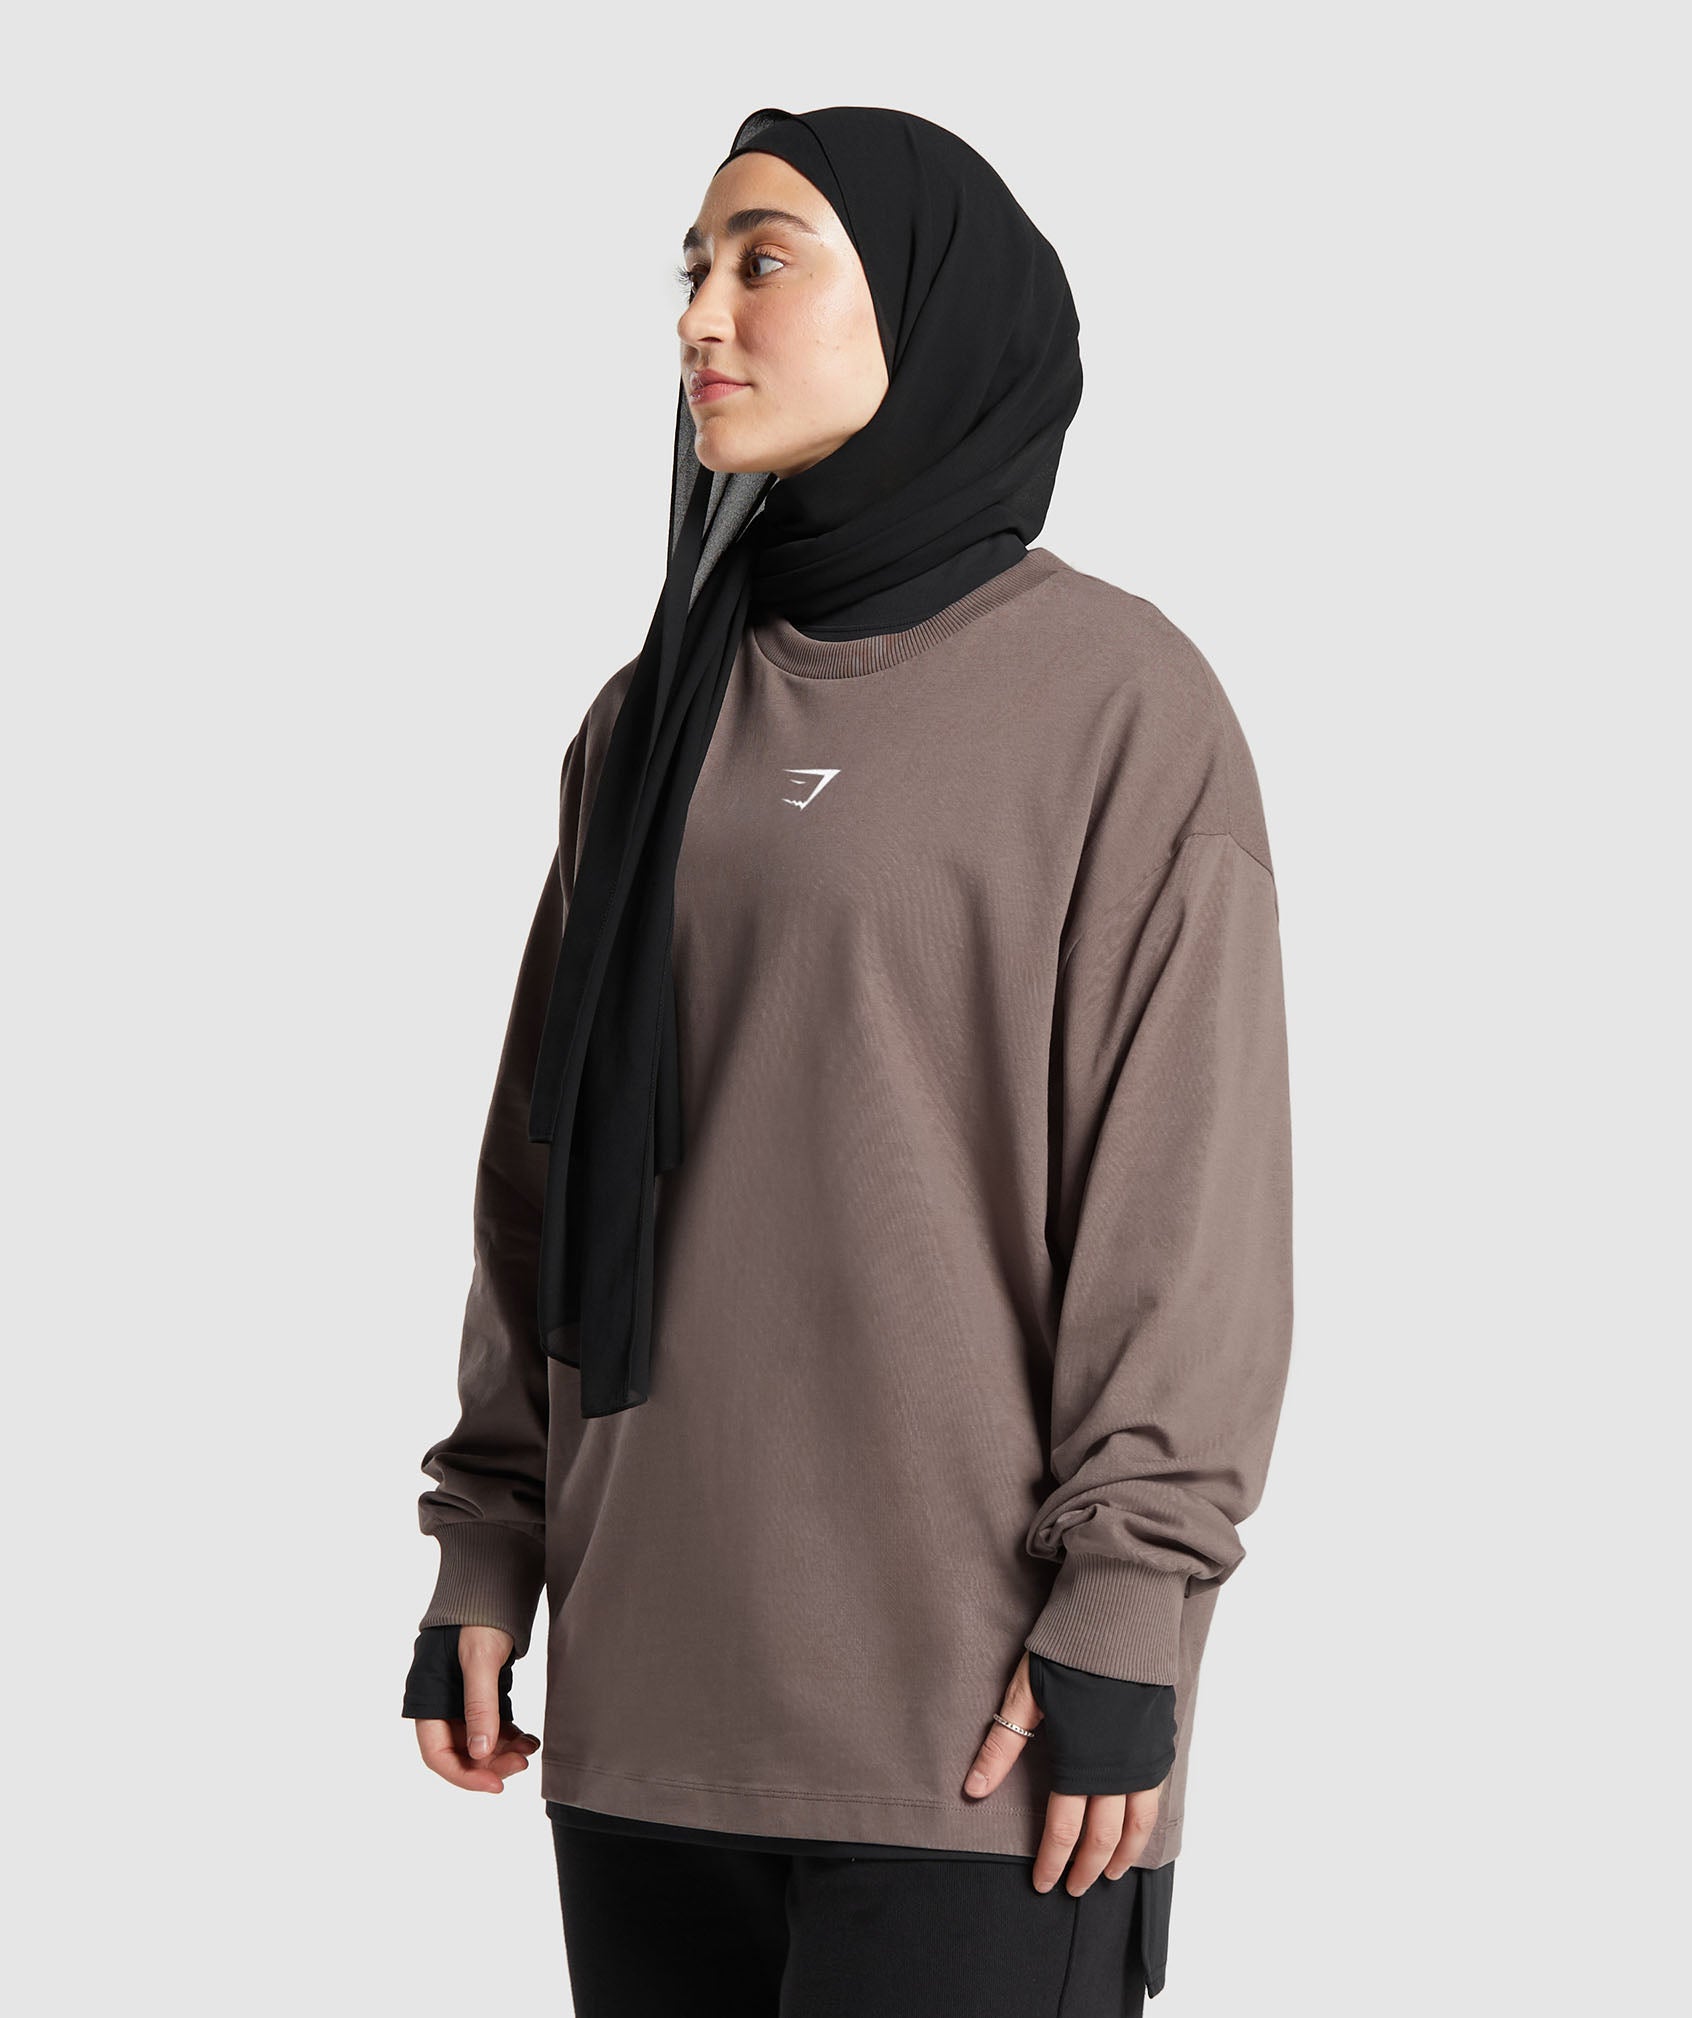 GS X Leana Deeb Graphic Oversized Long Sleeve Top in Dusty Brown - view 3